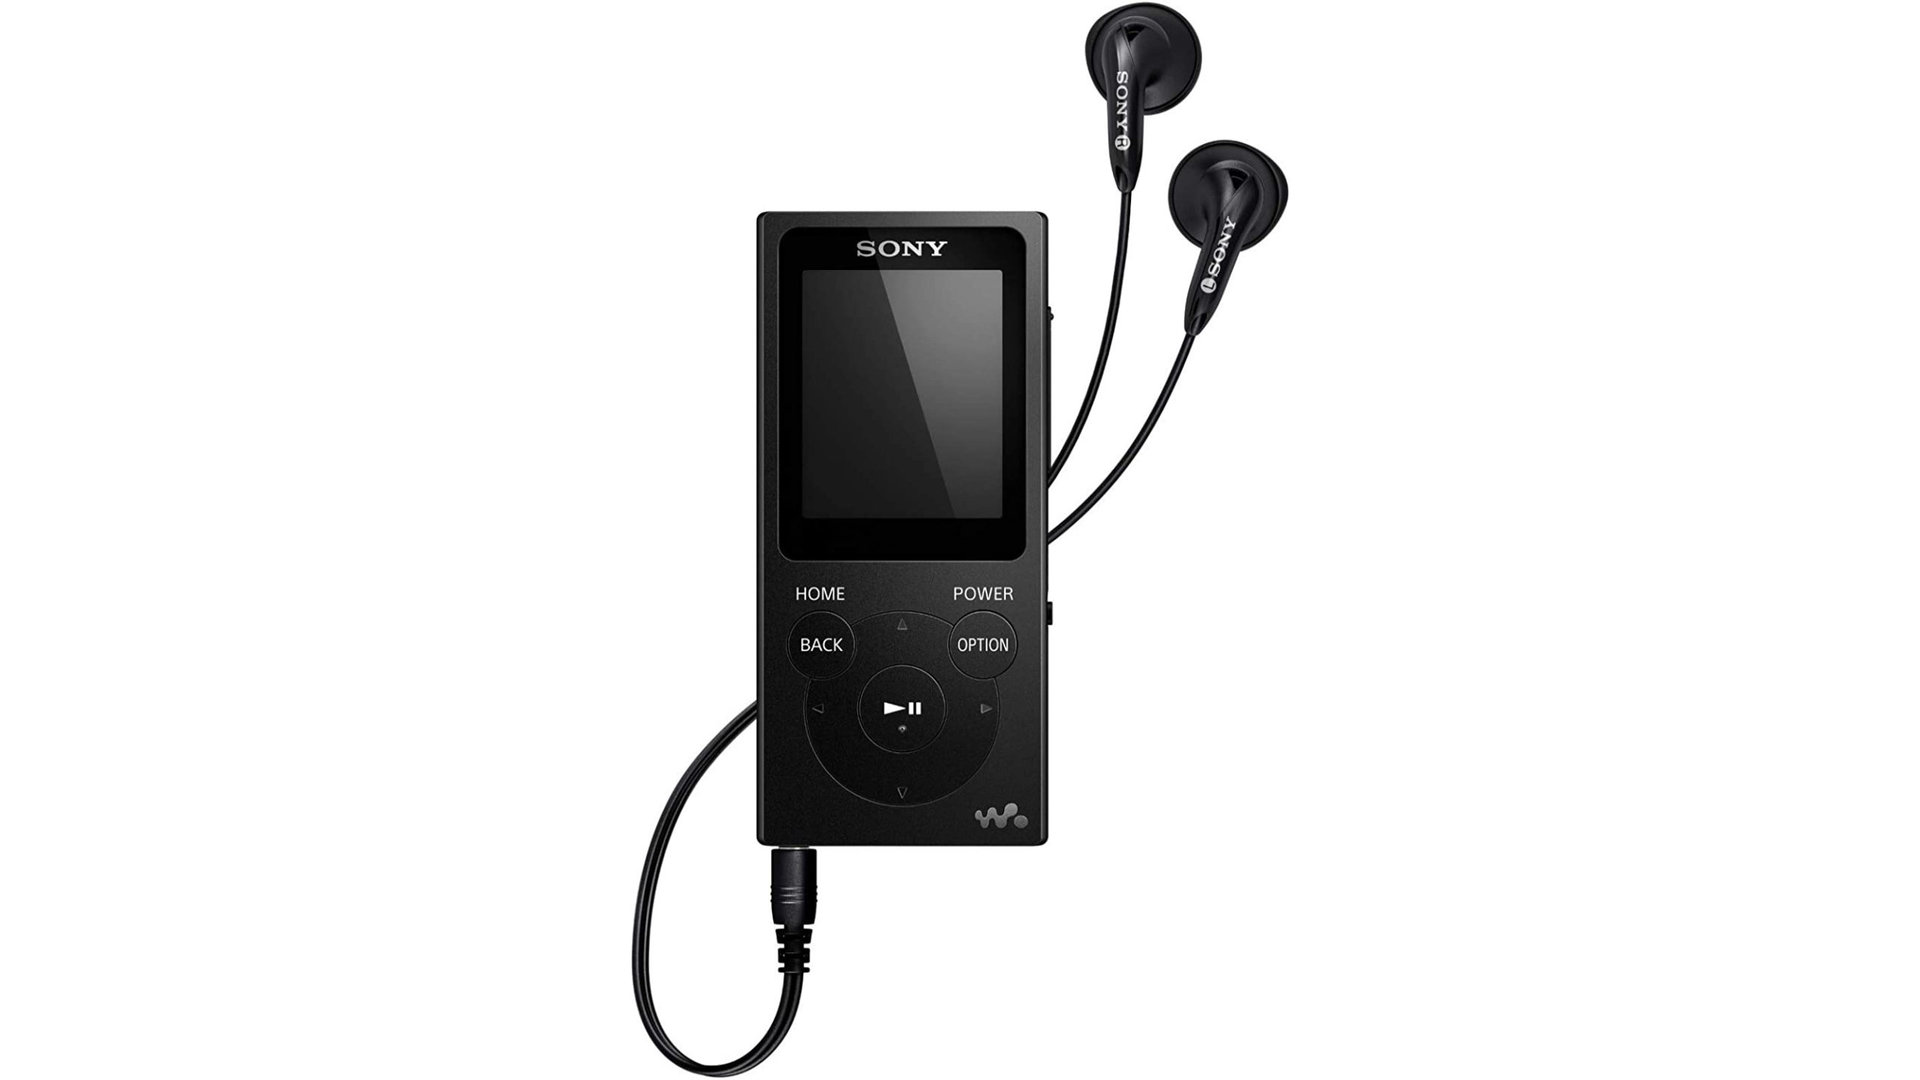 Sony NW E394 Walkman - The best MP3 players